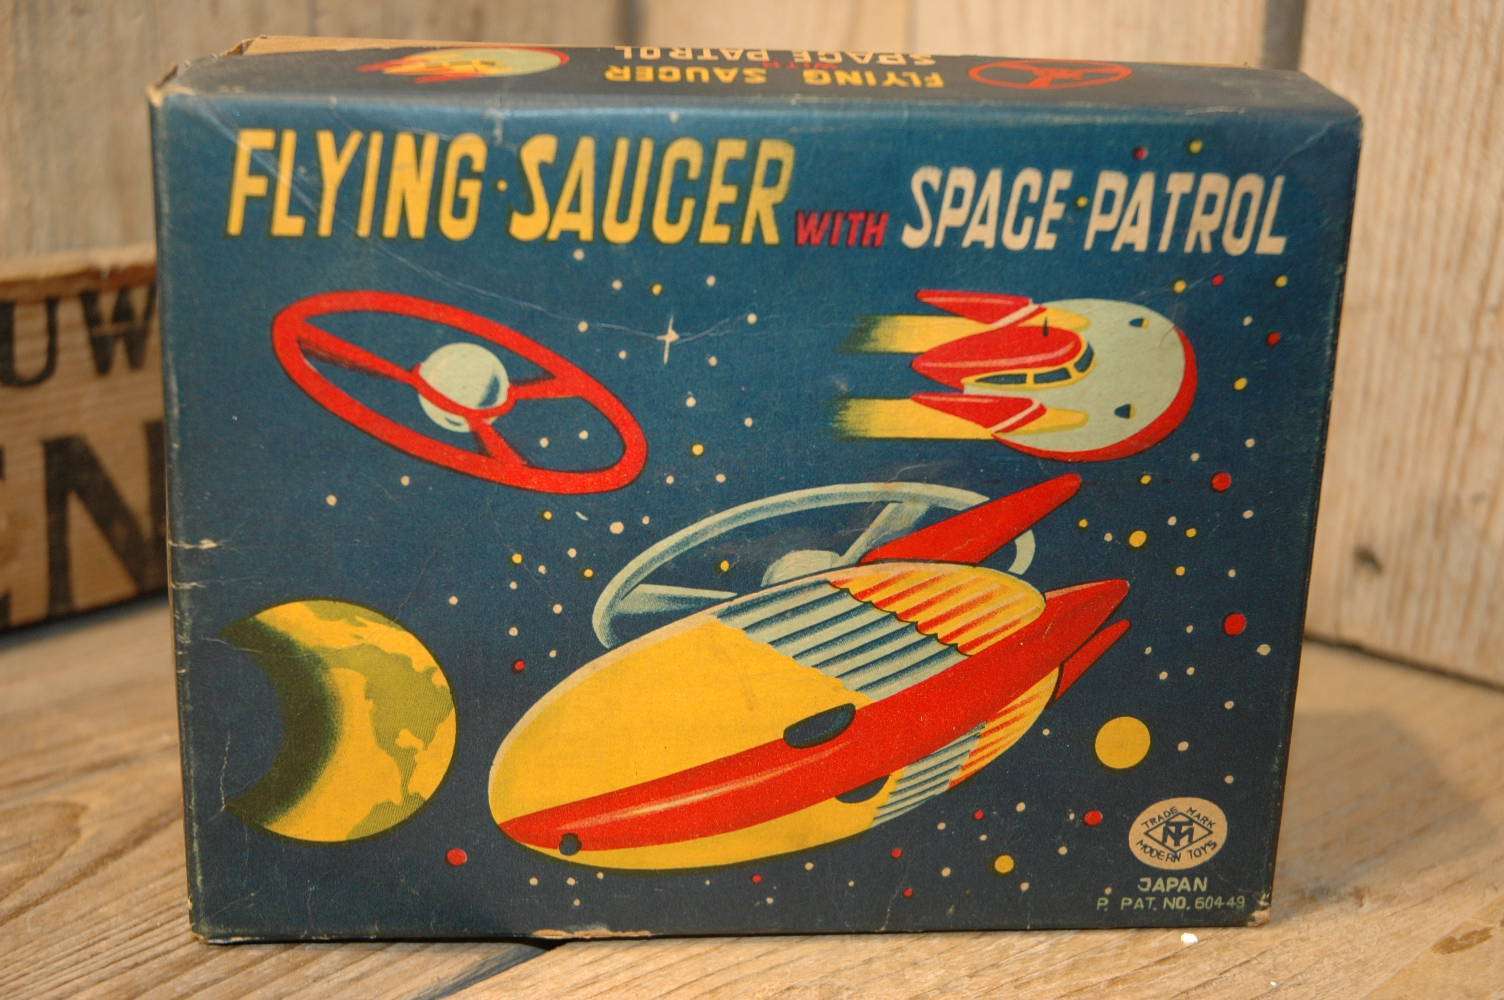 Modern Toys - Flying Saucer with Space Patrol - Vintage Spacetoys